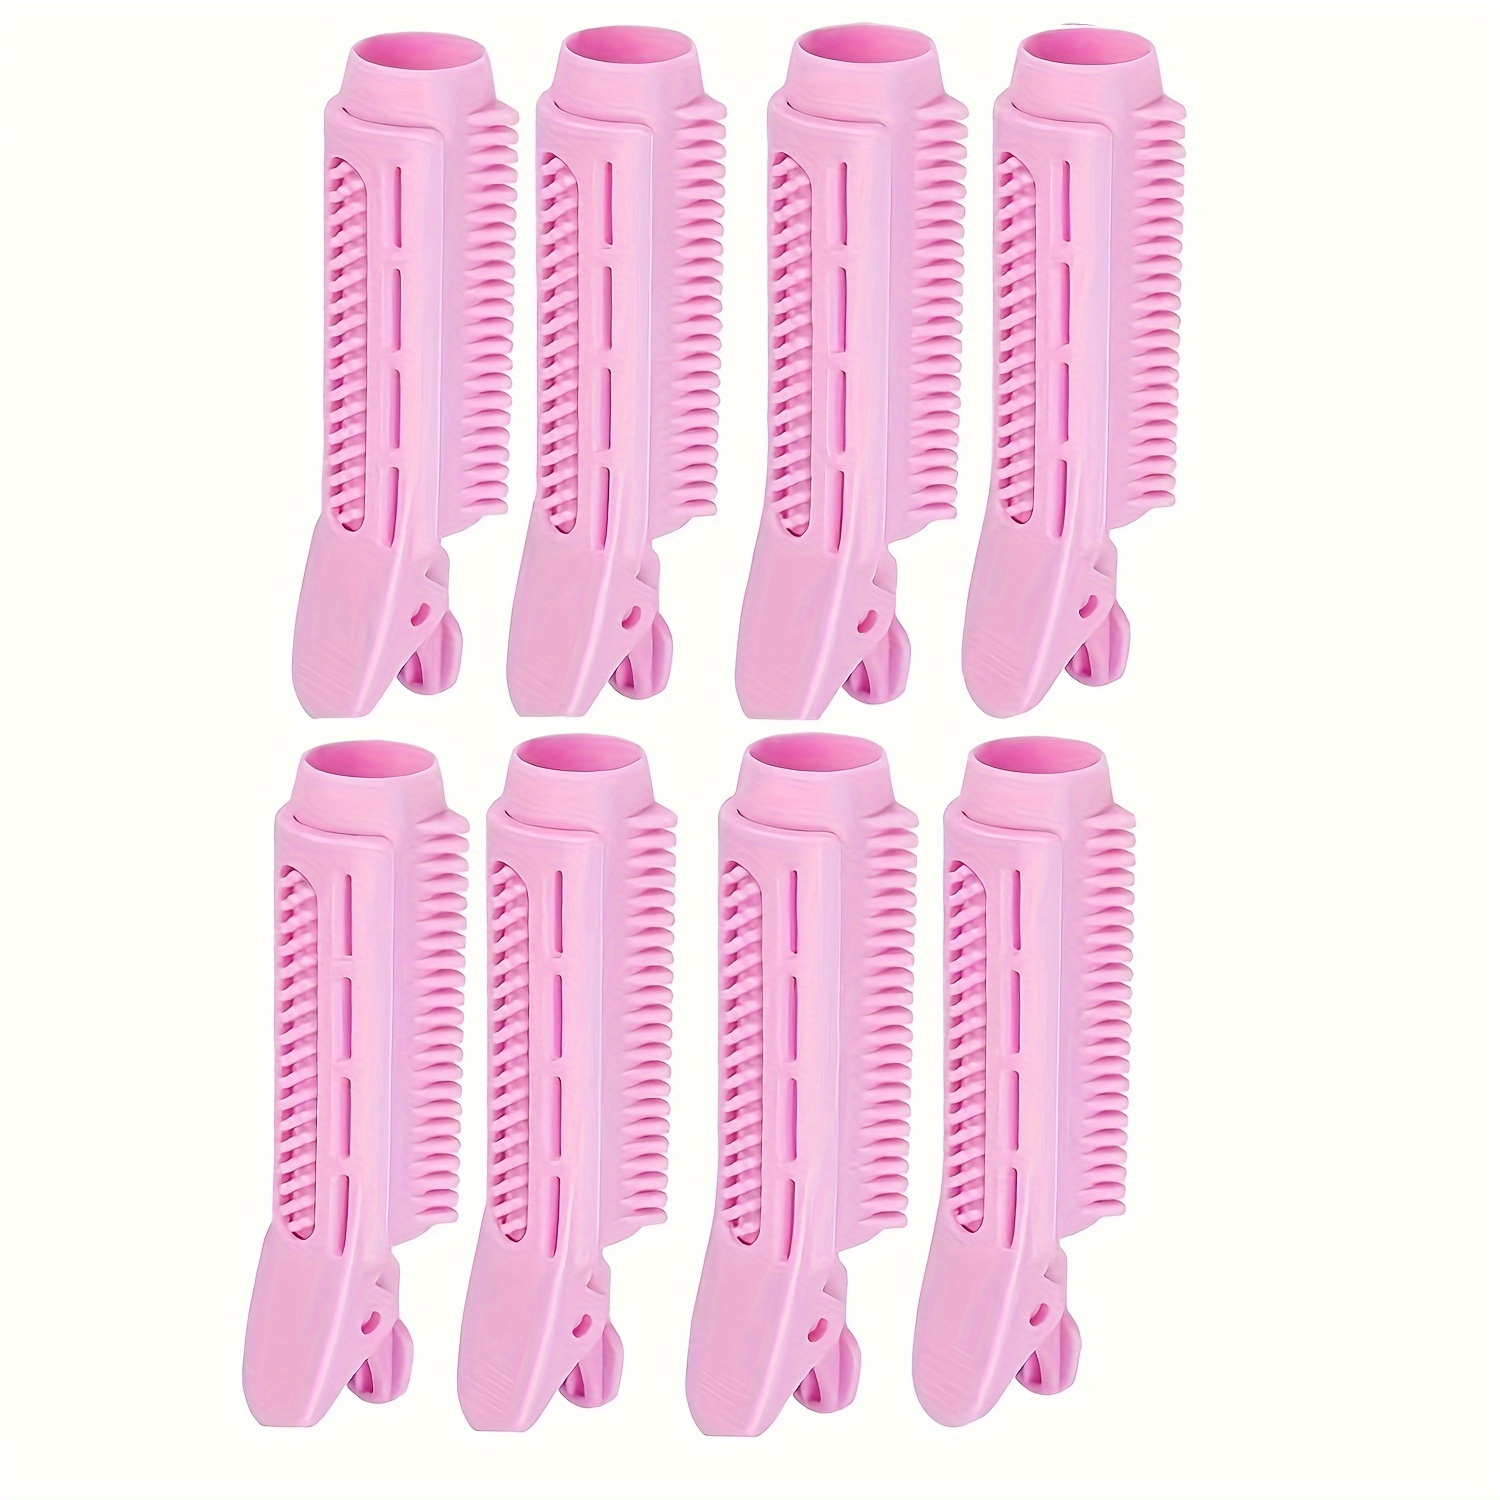 

8pcs/set Volumizing Hair Root Clip Self-grip Hair Styling Tool Fluffy Air Bang Rollers Hair Styling Accessories For All Hair Type